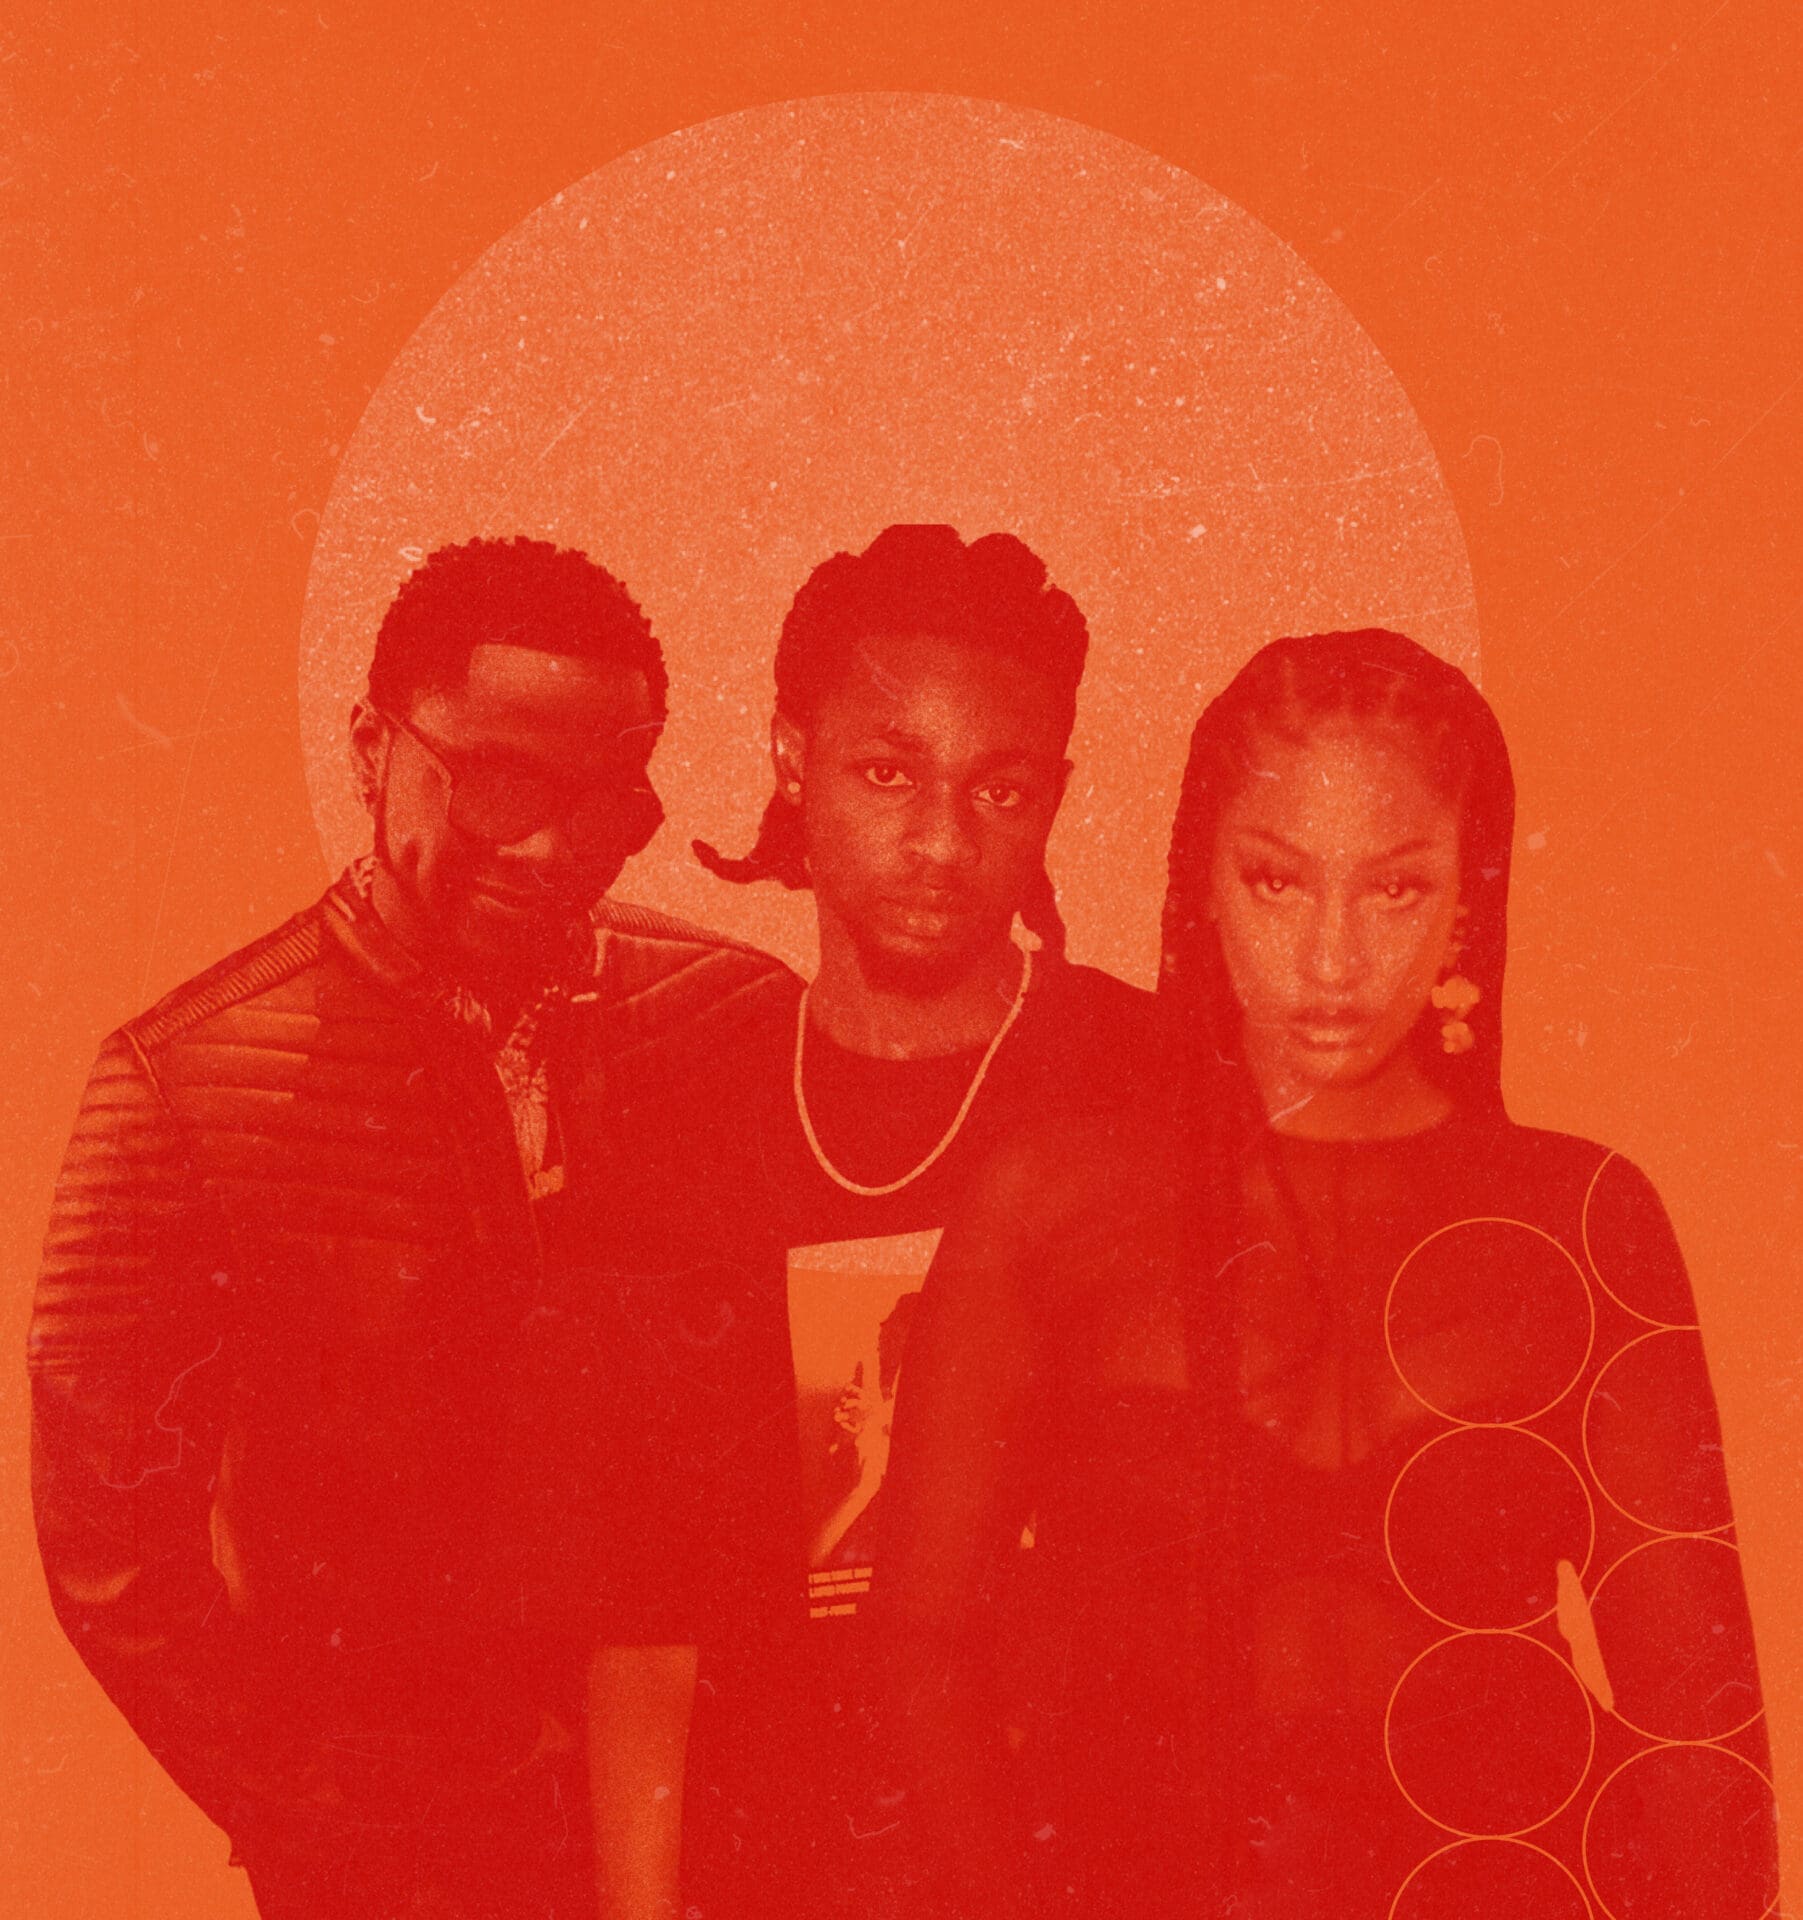 A red and orange graphic collage featuring Afropop superstars Kizz Daniel, Omah Lay and Tems